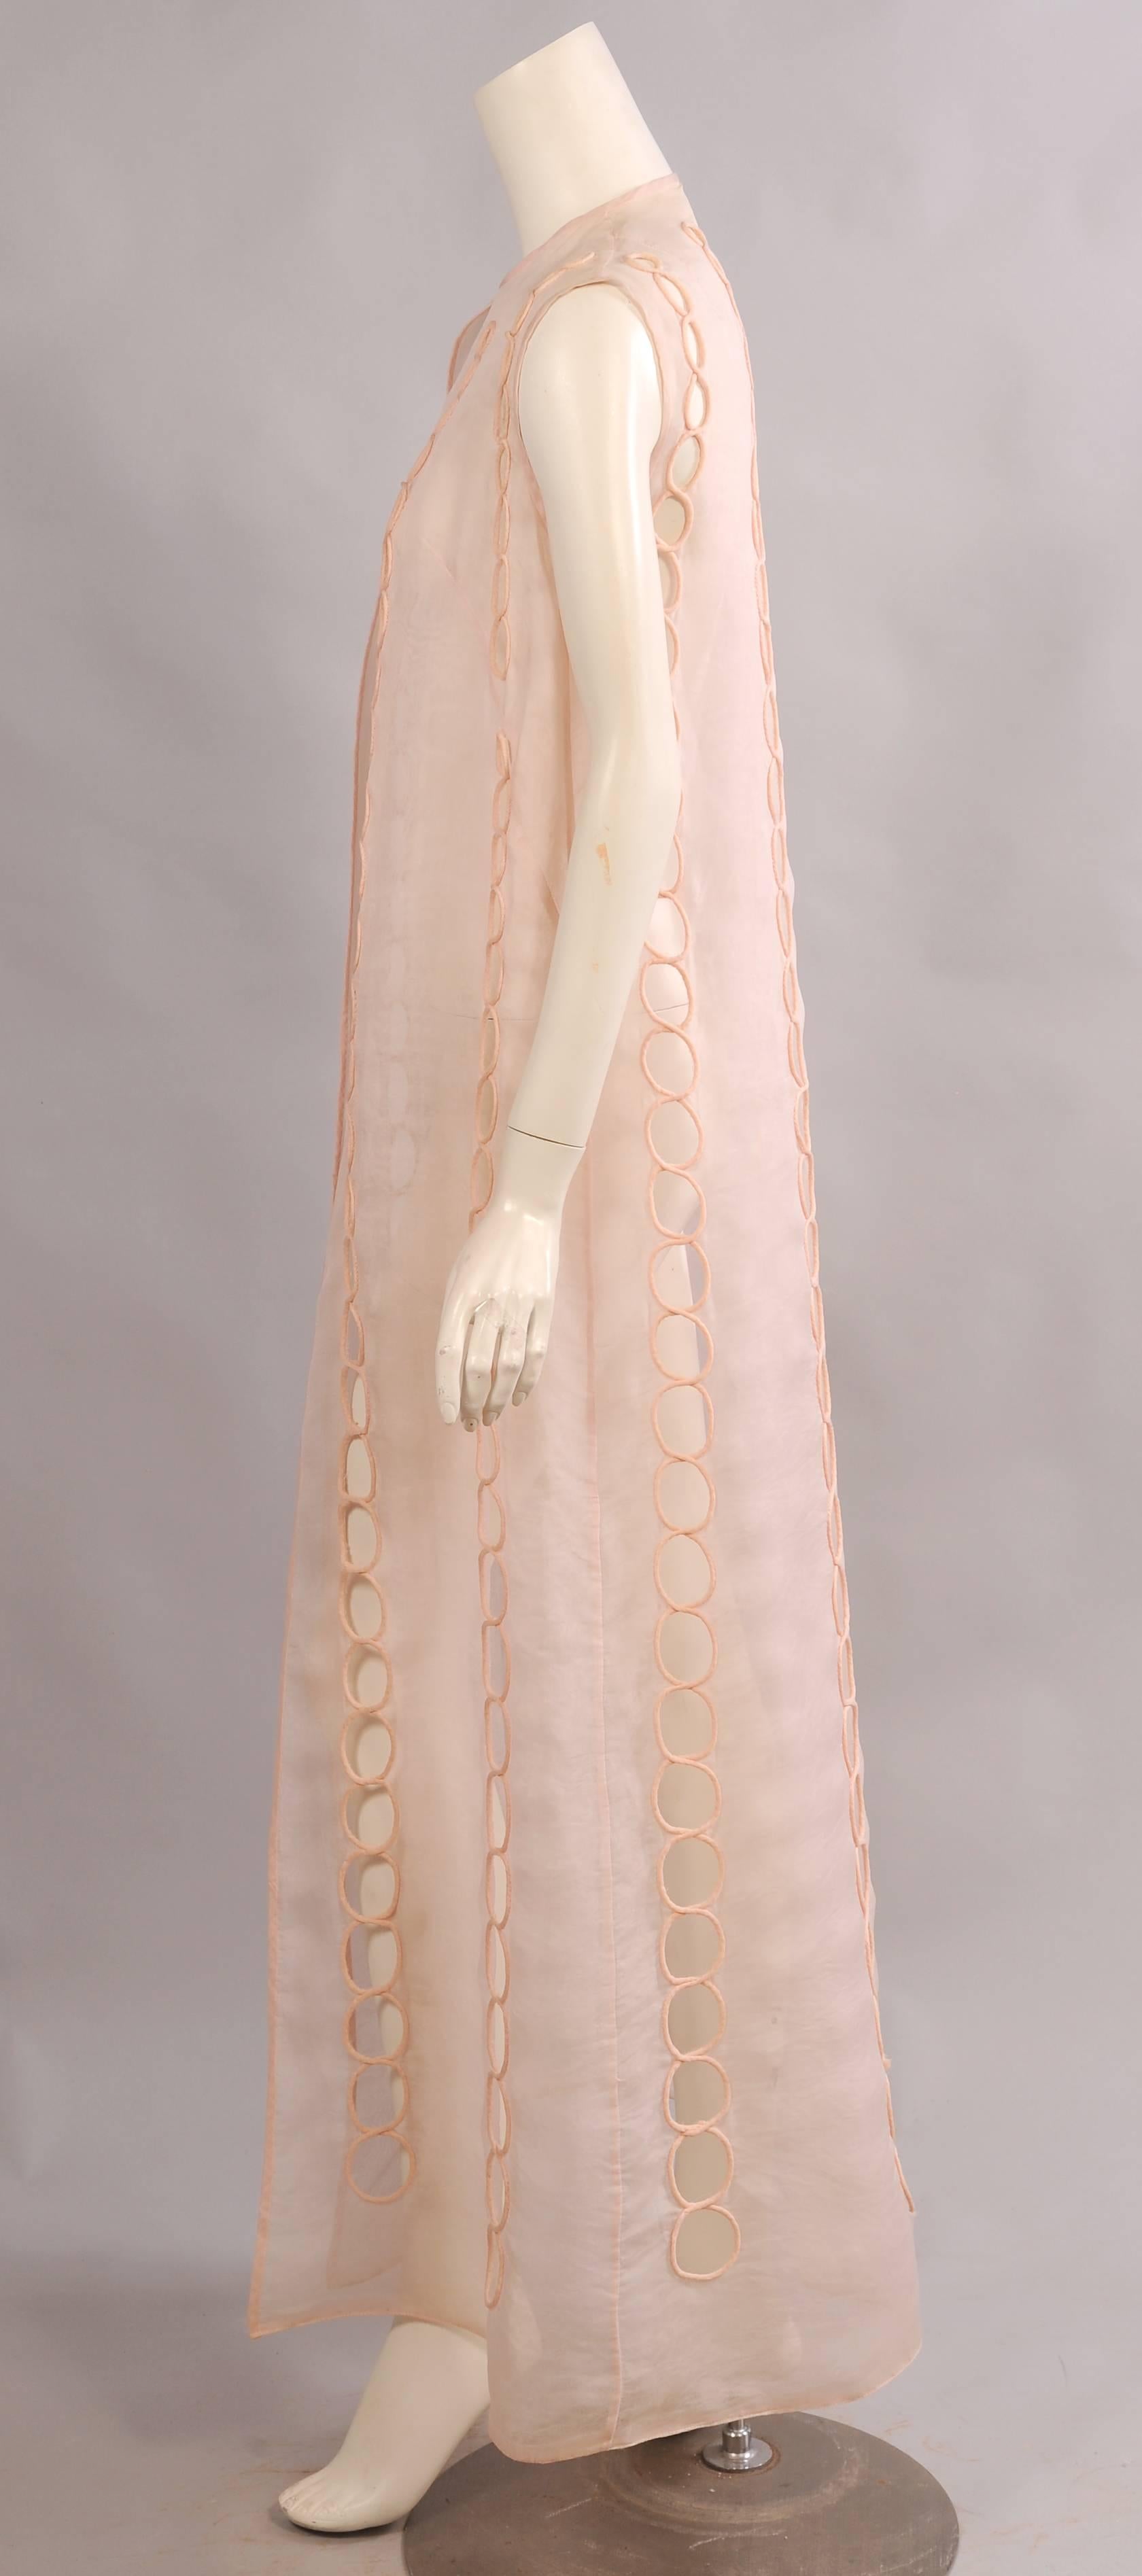 Sheer pale pink silk organza is used for this long vest or sleeveless summer coat. Vertical rows of graduated open circles are edged with matching pink piping. All of the edges are bound with pink organza and the hem has horsehair binding for added